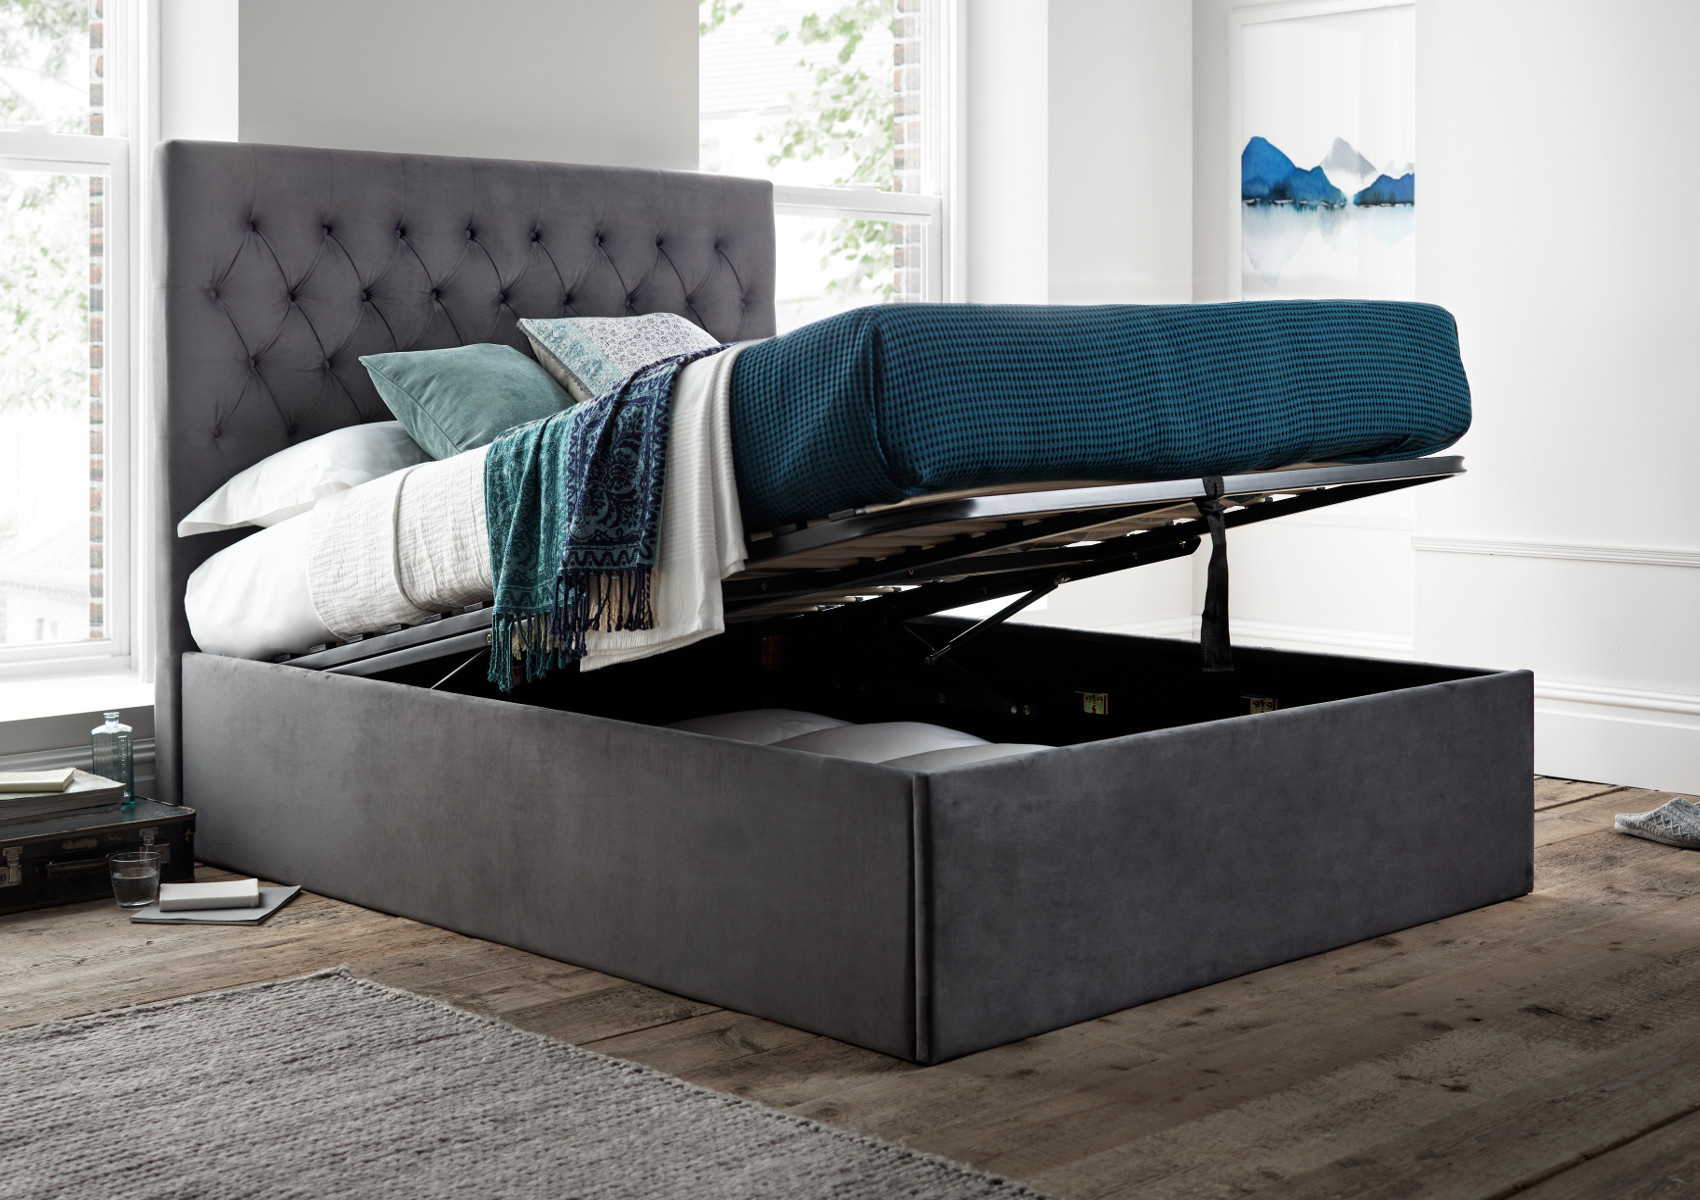 View Maxi Charcoal Velvet Upholstered Ottoman Storage King Size Bed Frame Only Time4Sleep information